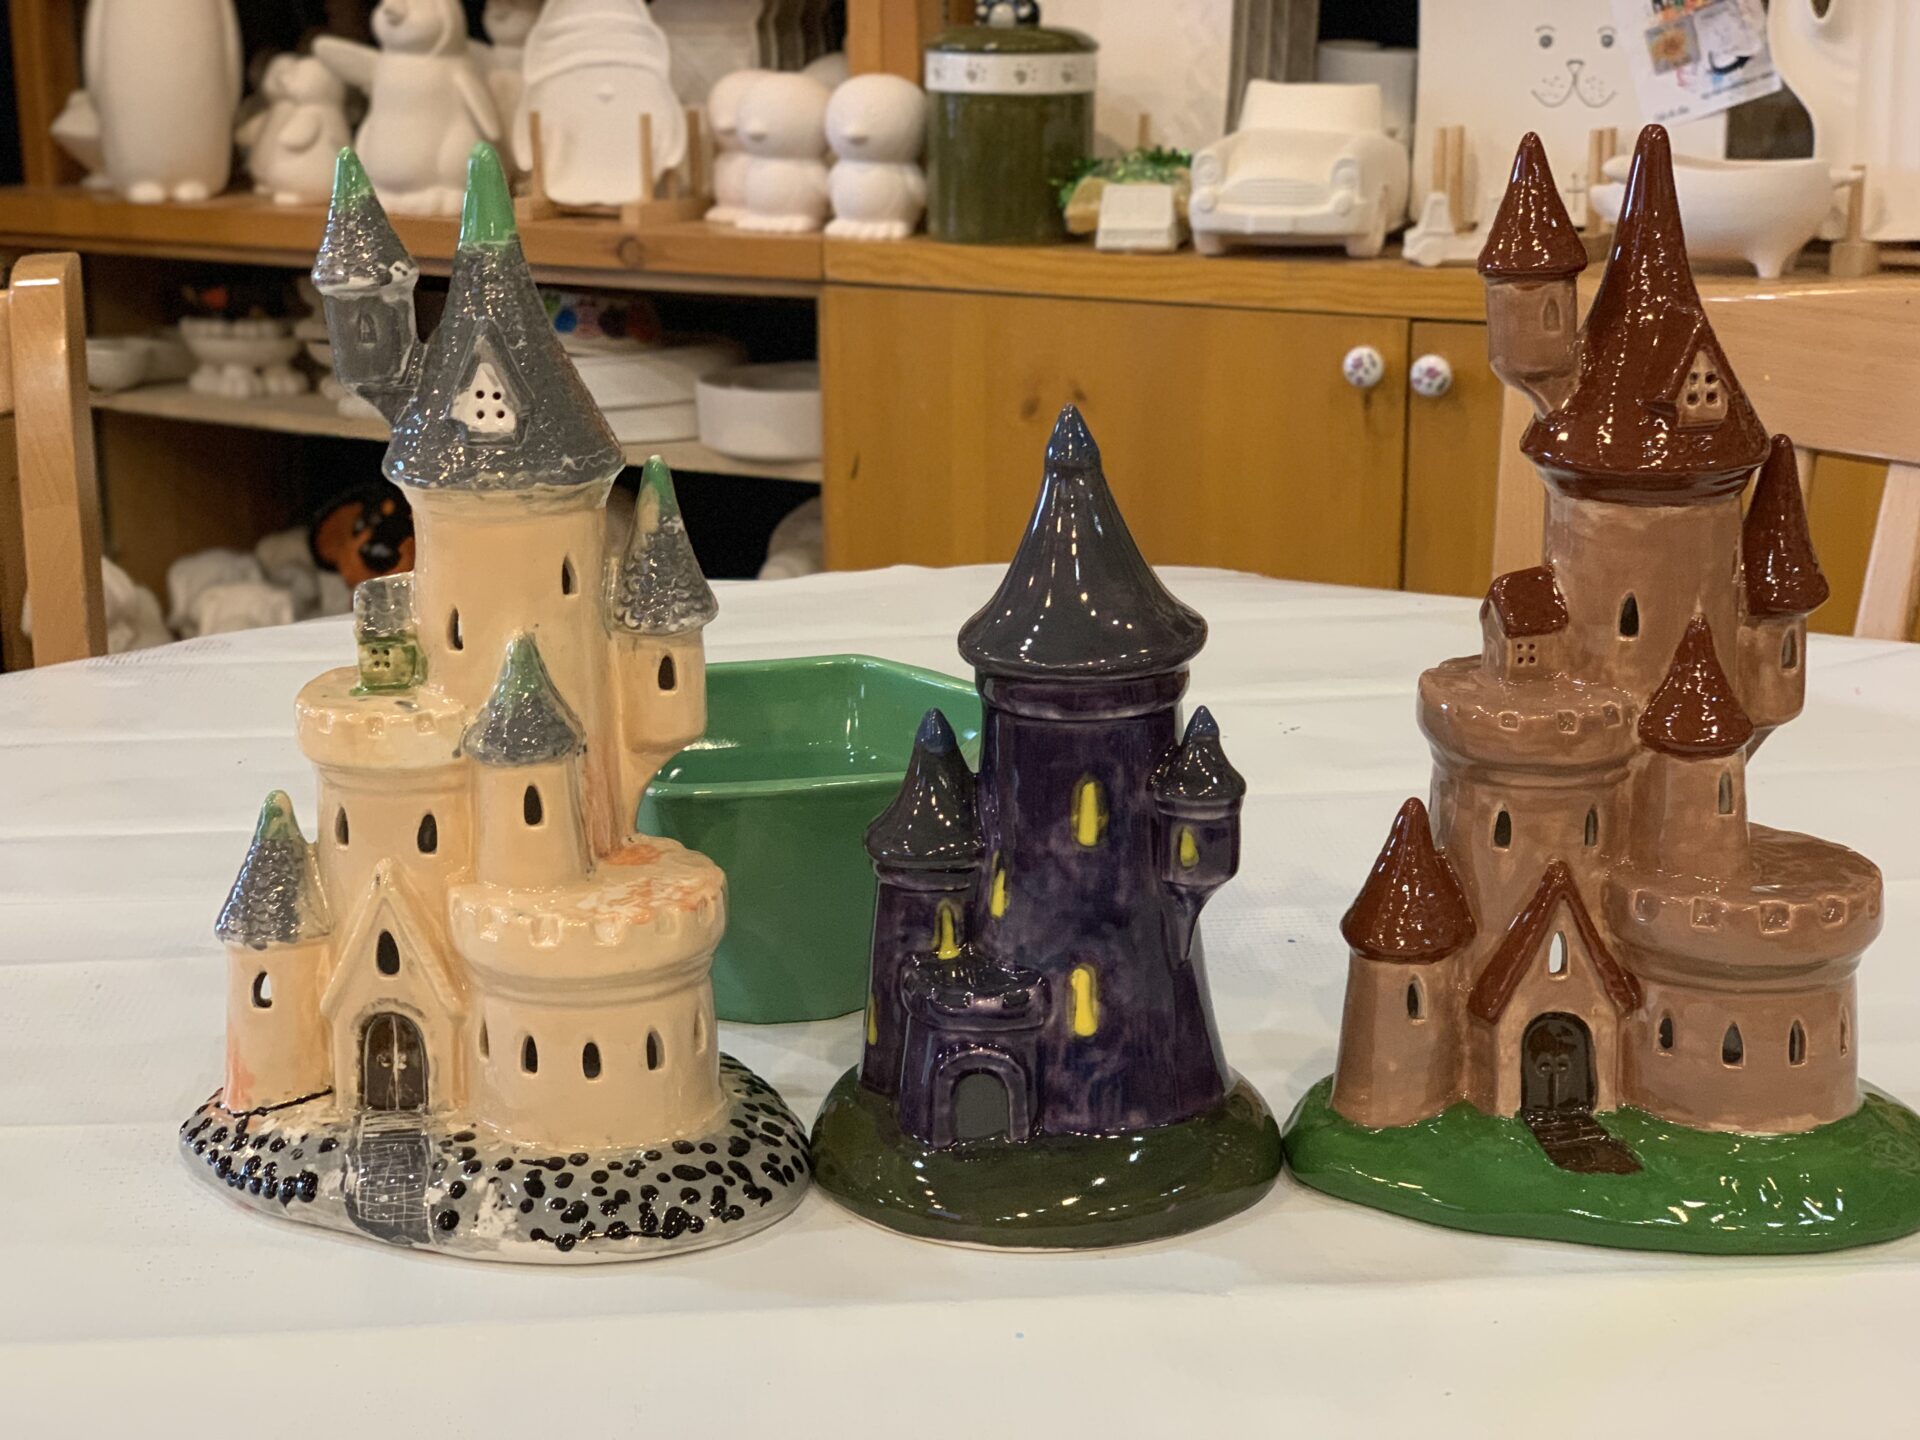 Castle made with clay and painted with water colors